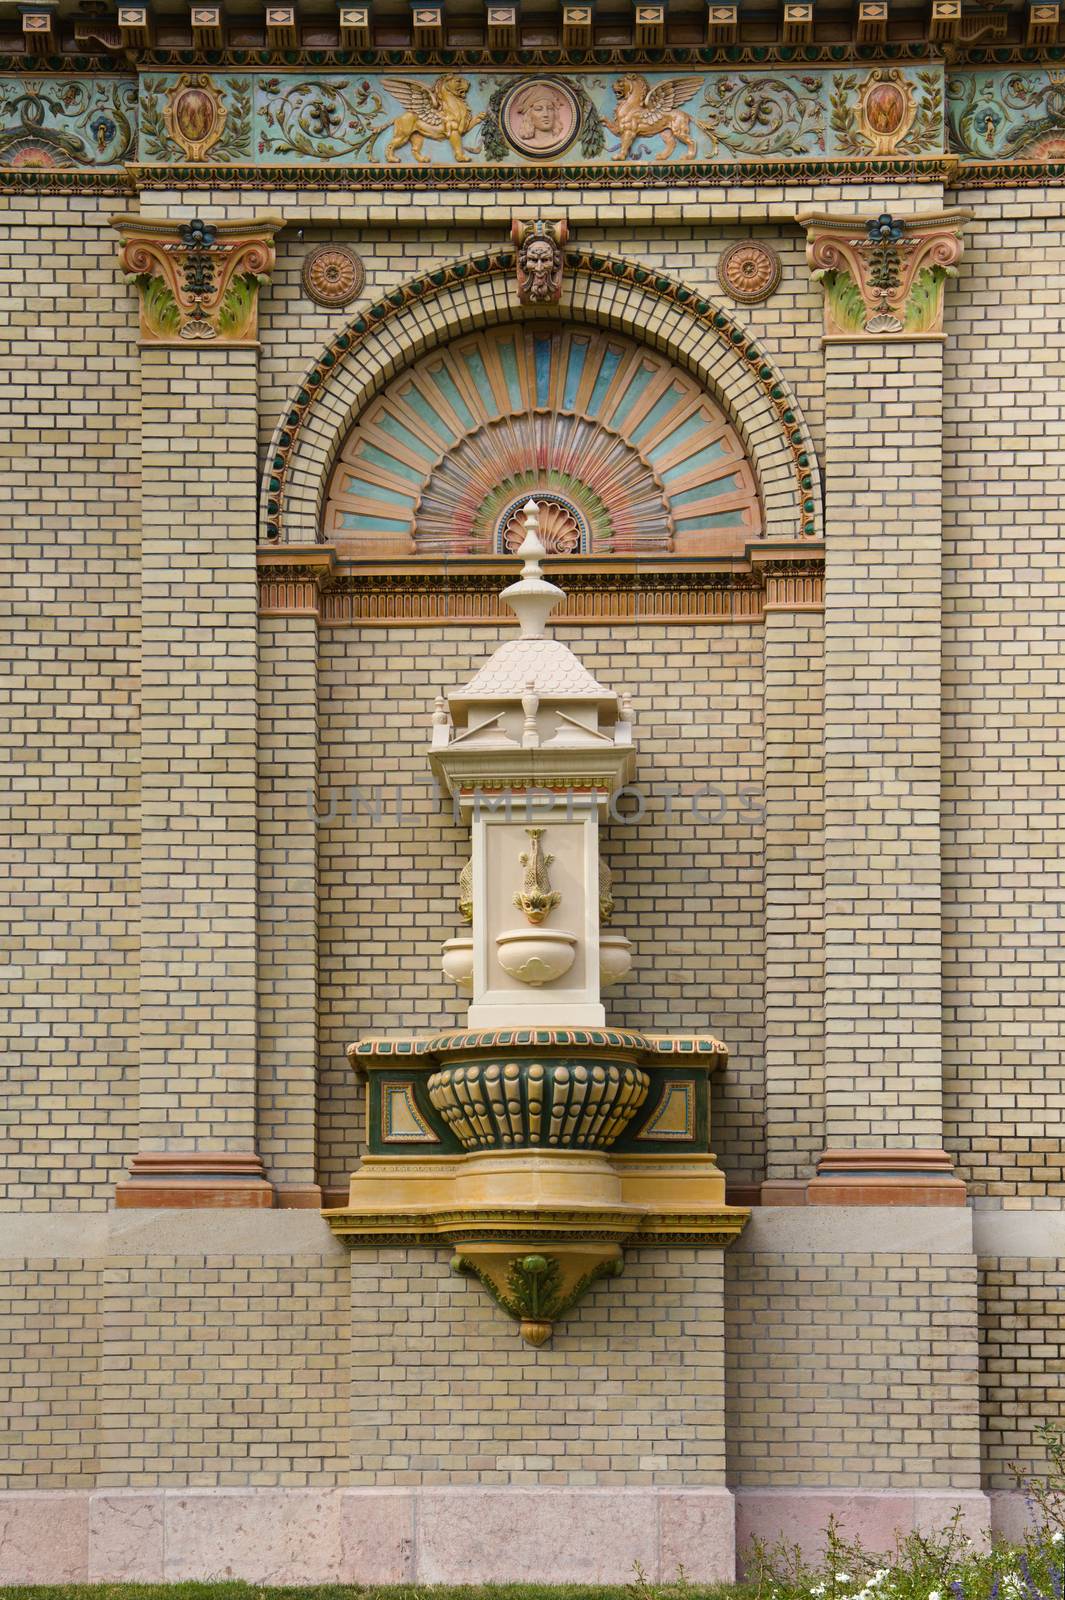 A historic fountain in a historic house wall decoration.